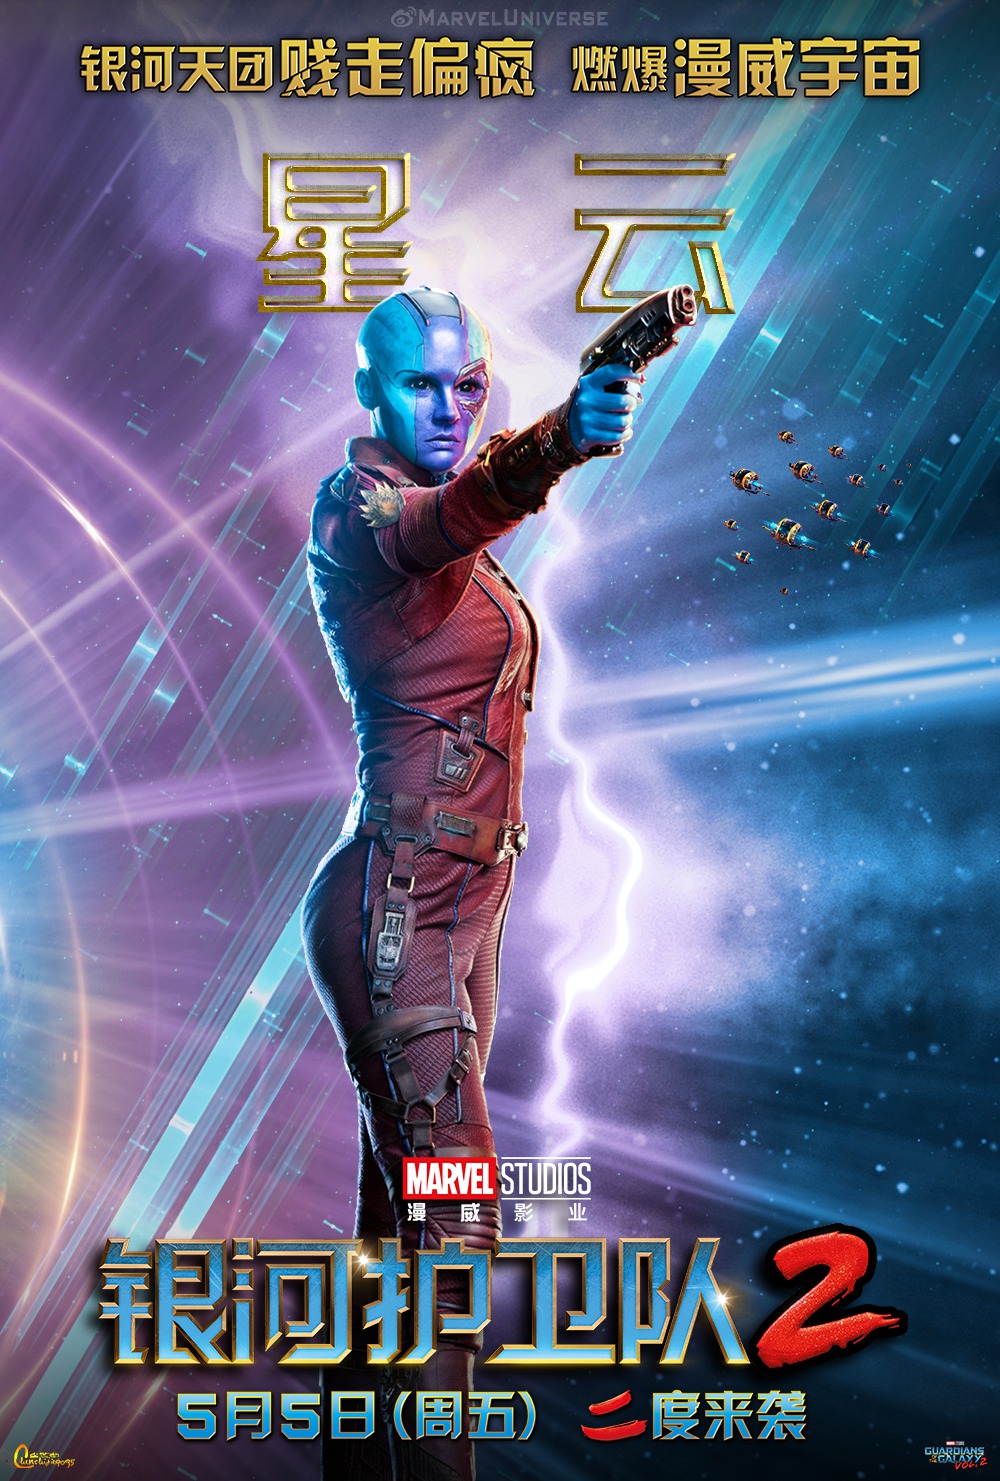 Extra Large Movie Poster Image for Guardians of the Galaxy Vol. 2 (#43 of 45)